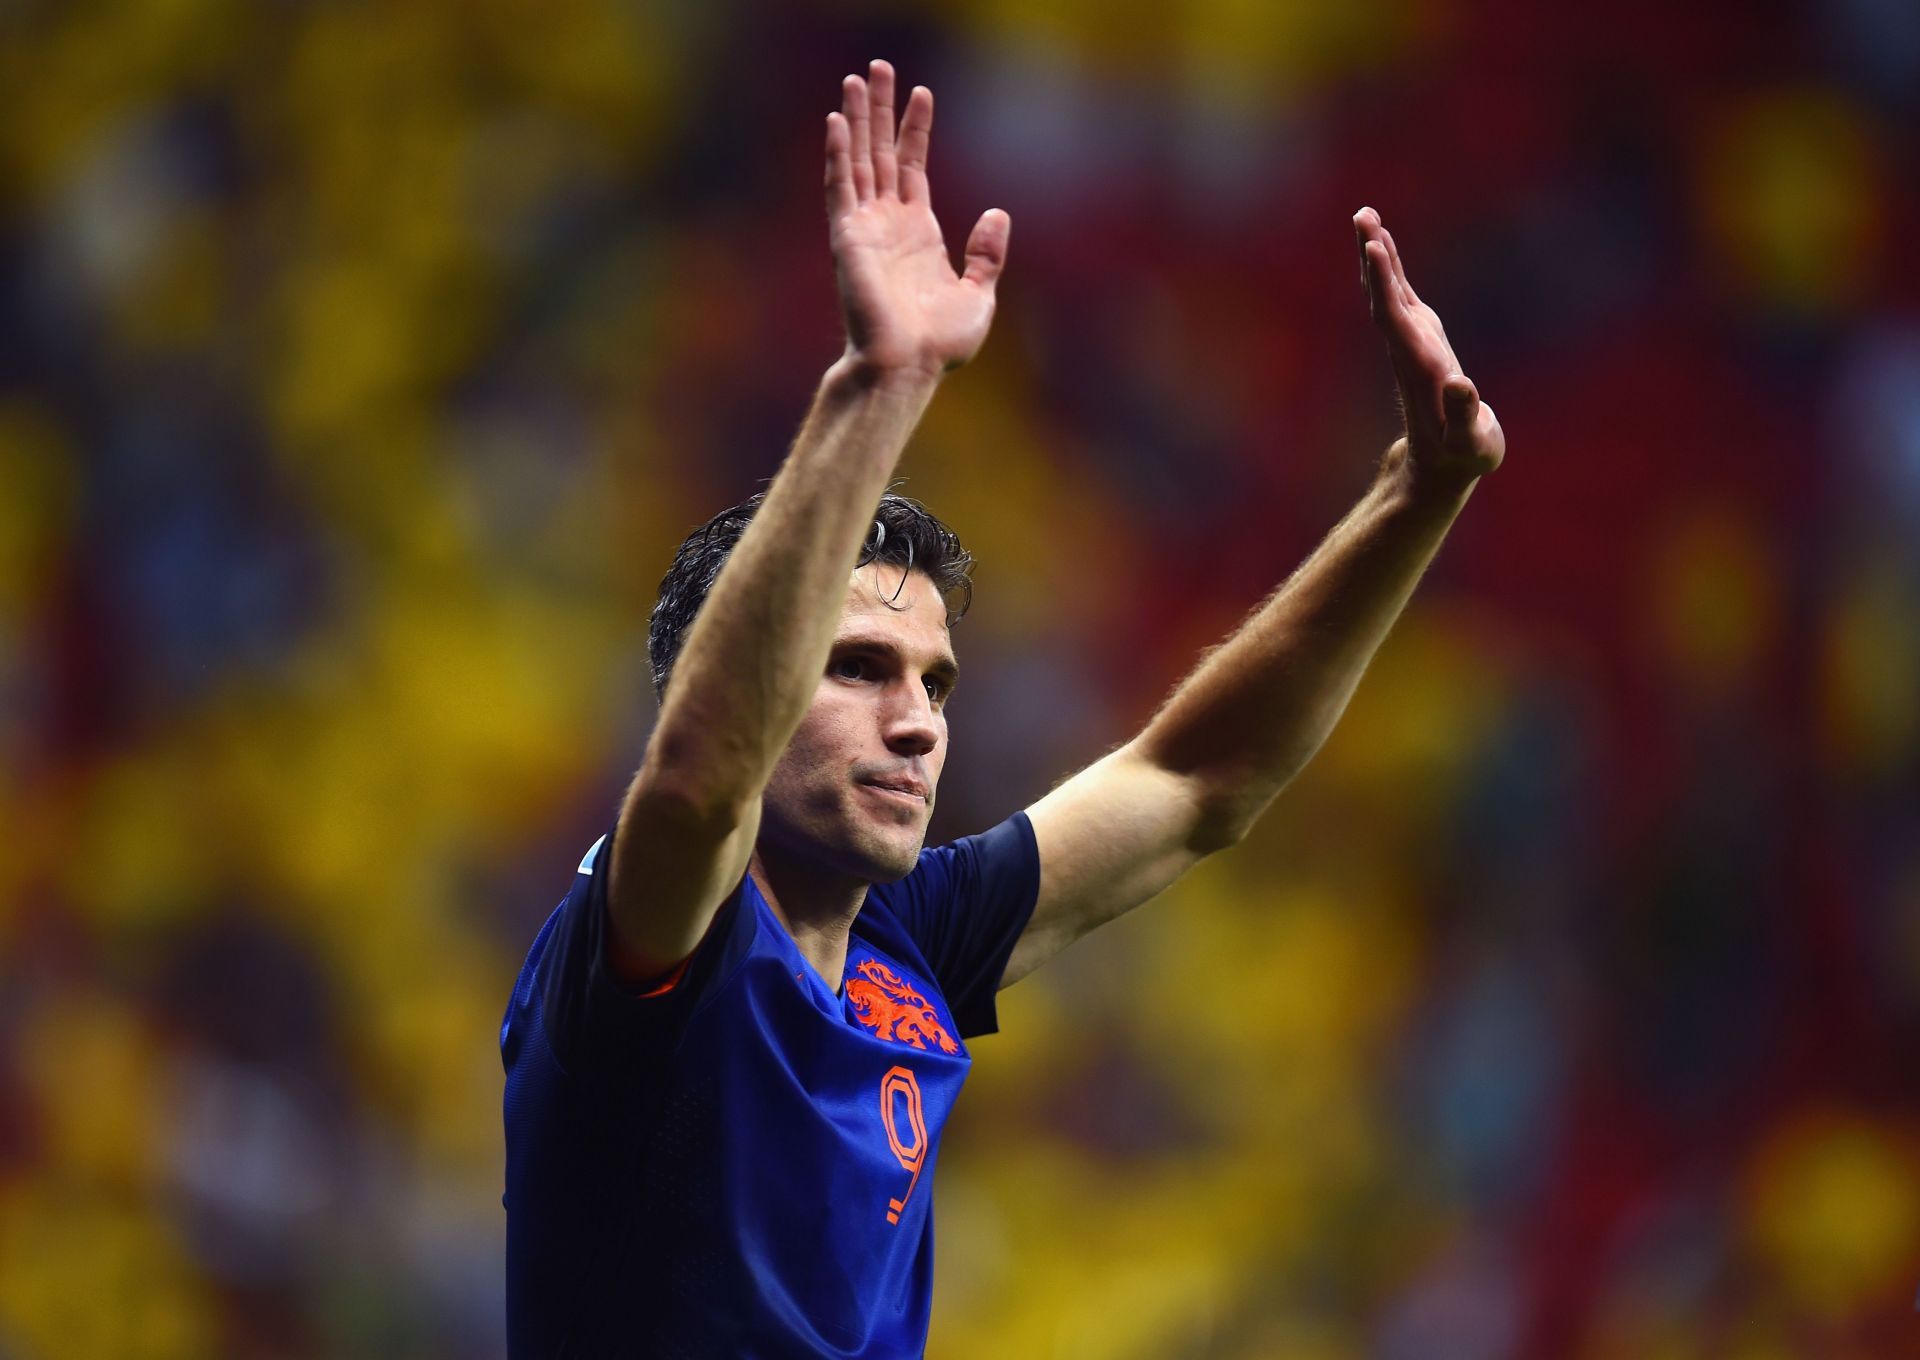 Robin van Persie was an incredible forward for his clubs and the Netherlands.